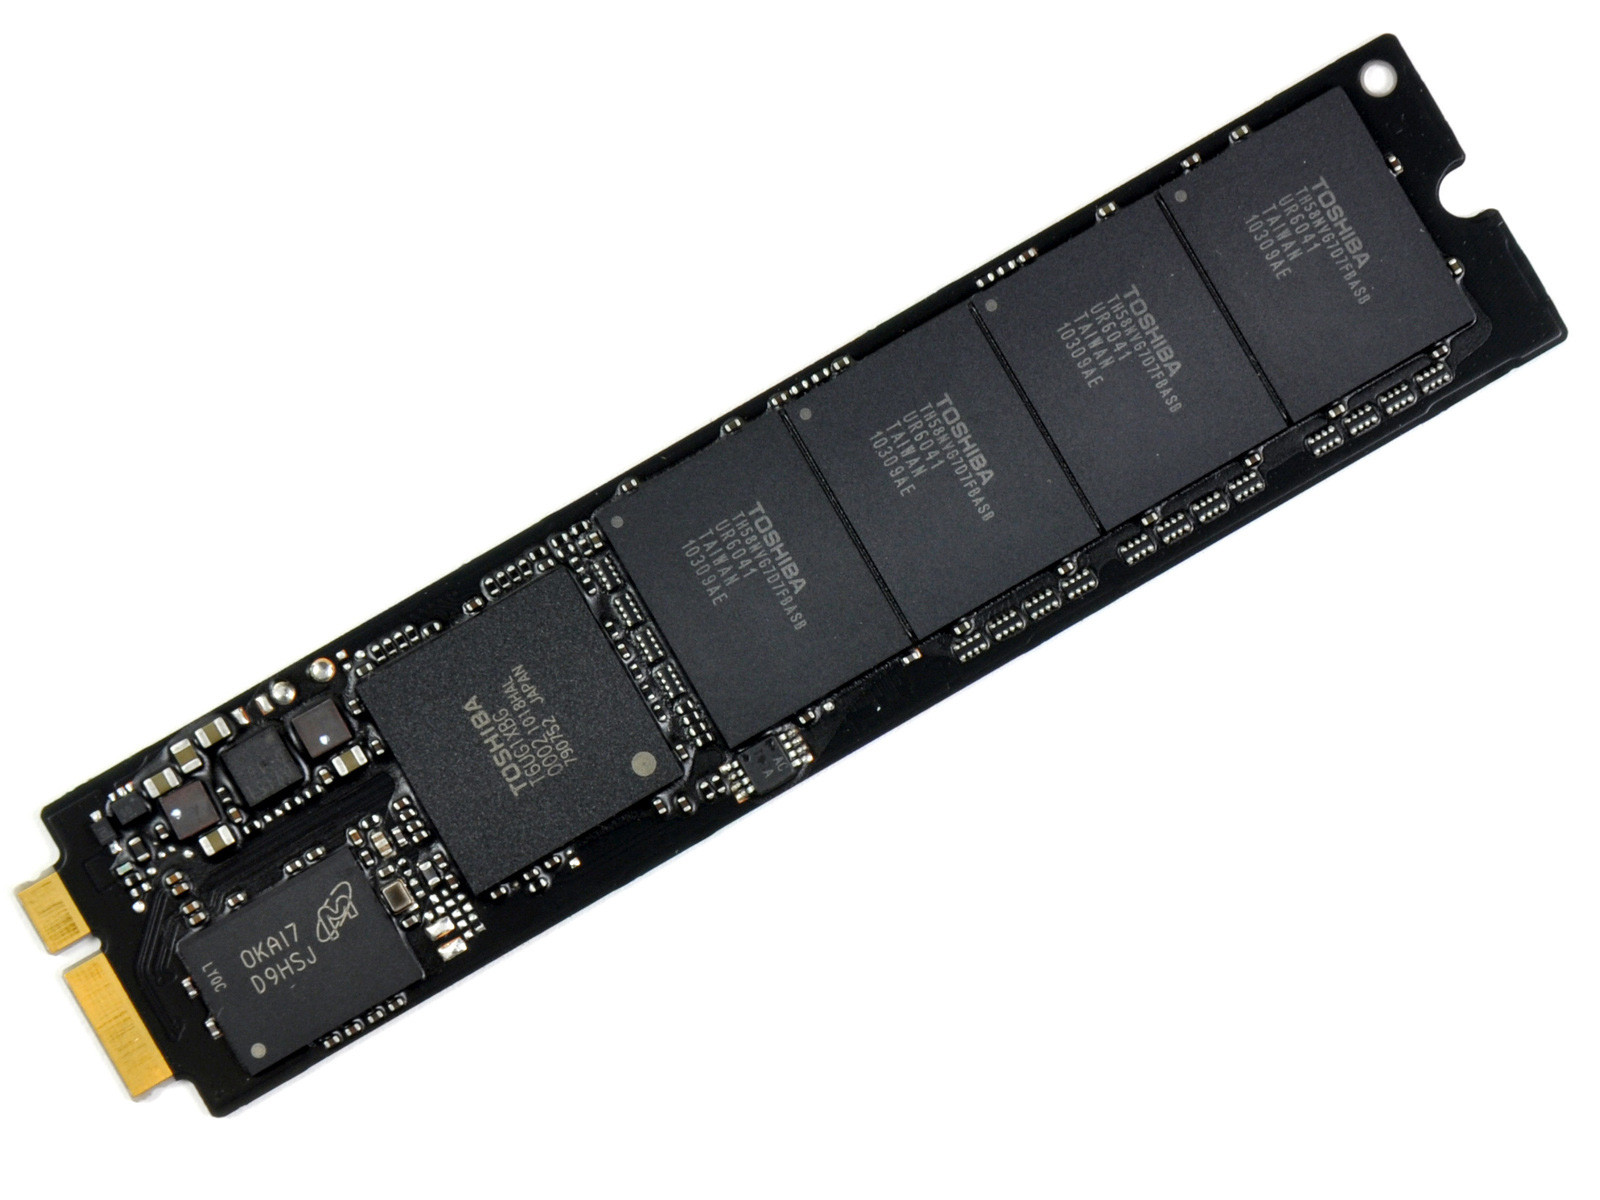 Ssd drive for macbook air early 2015